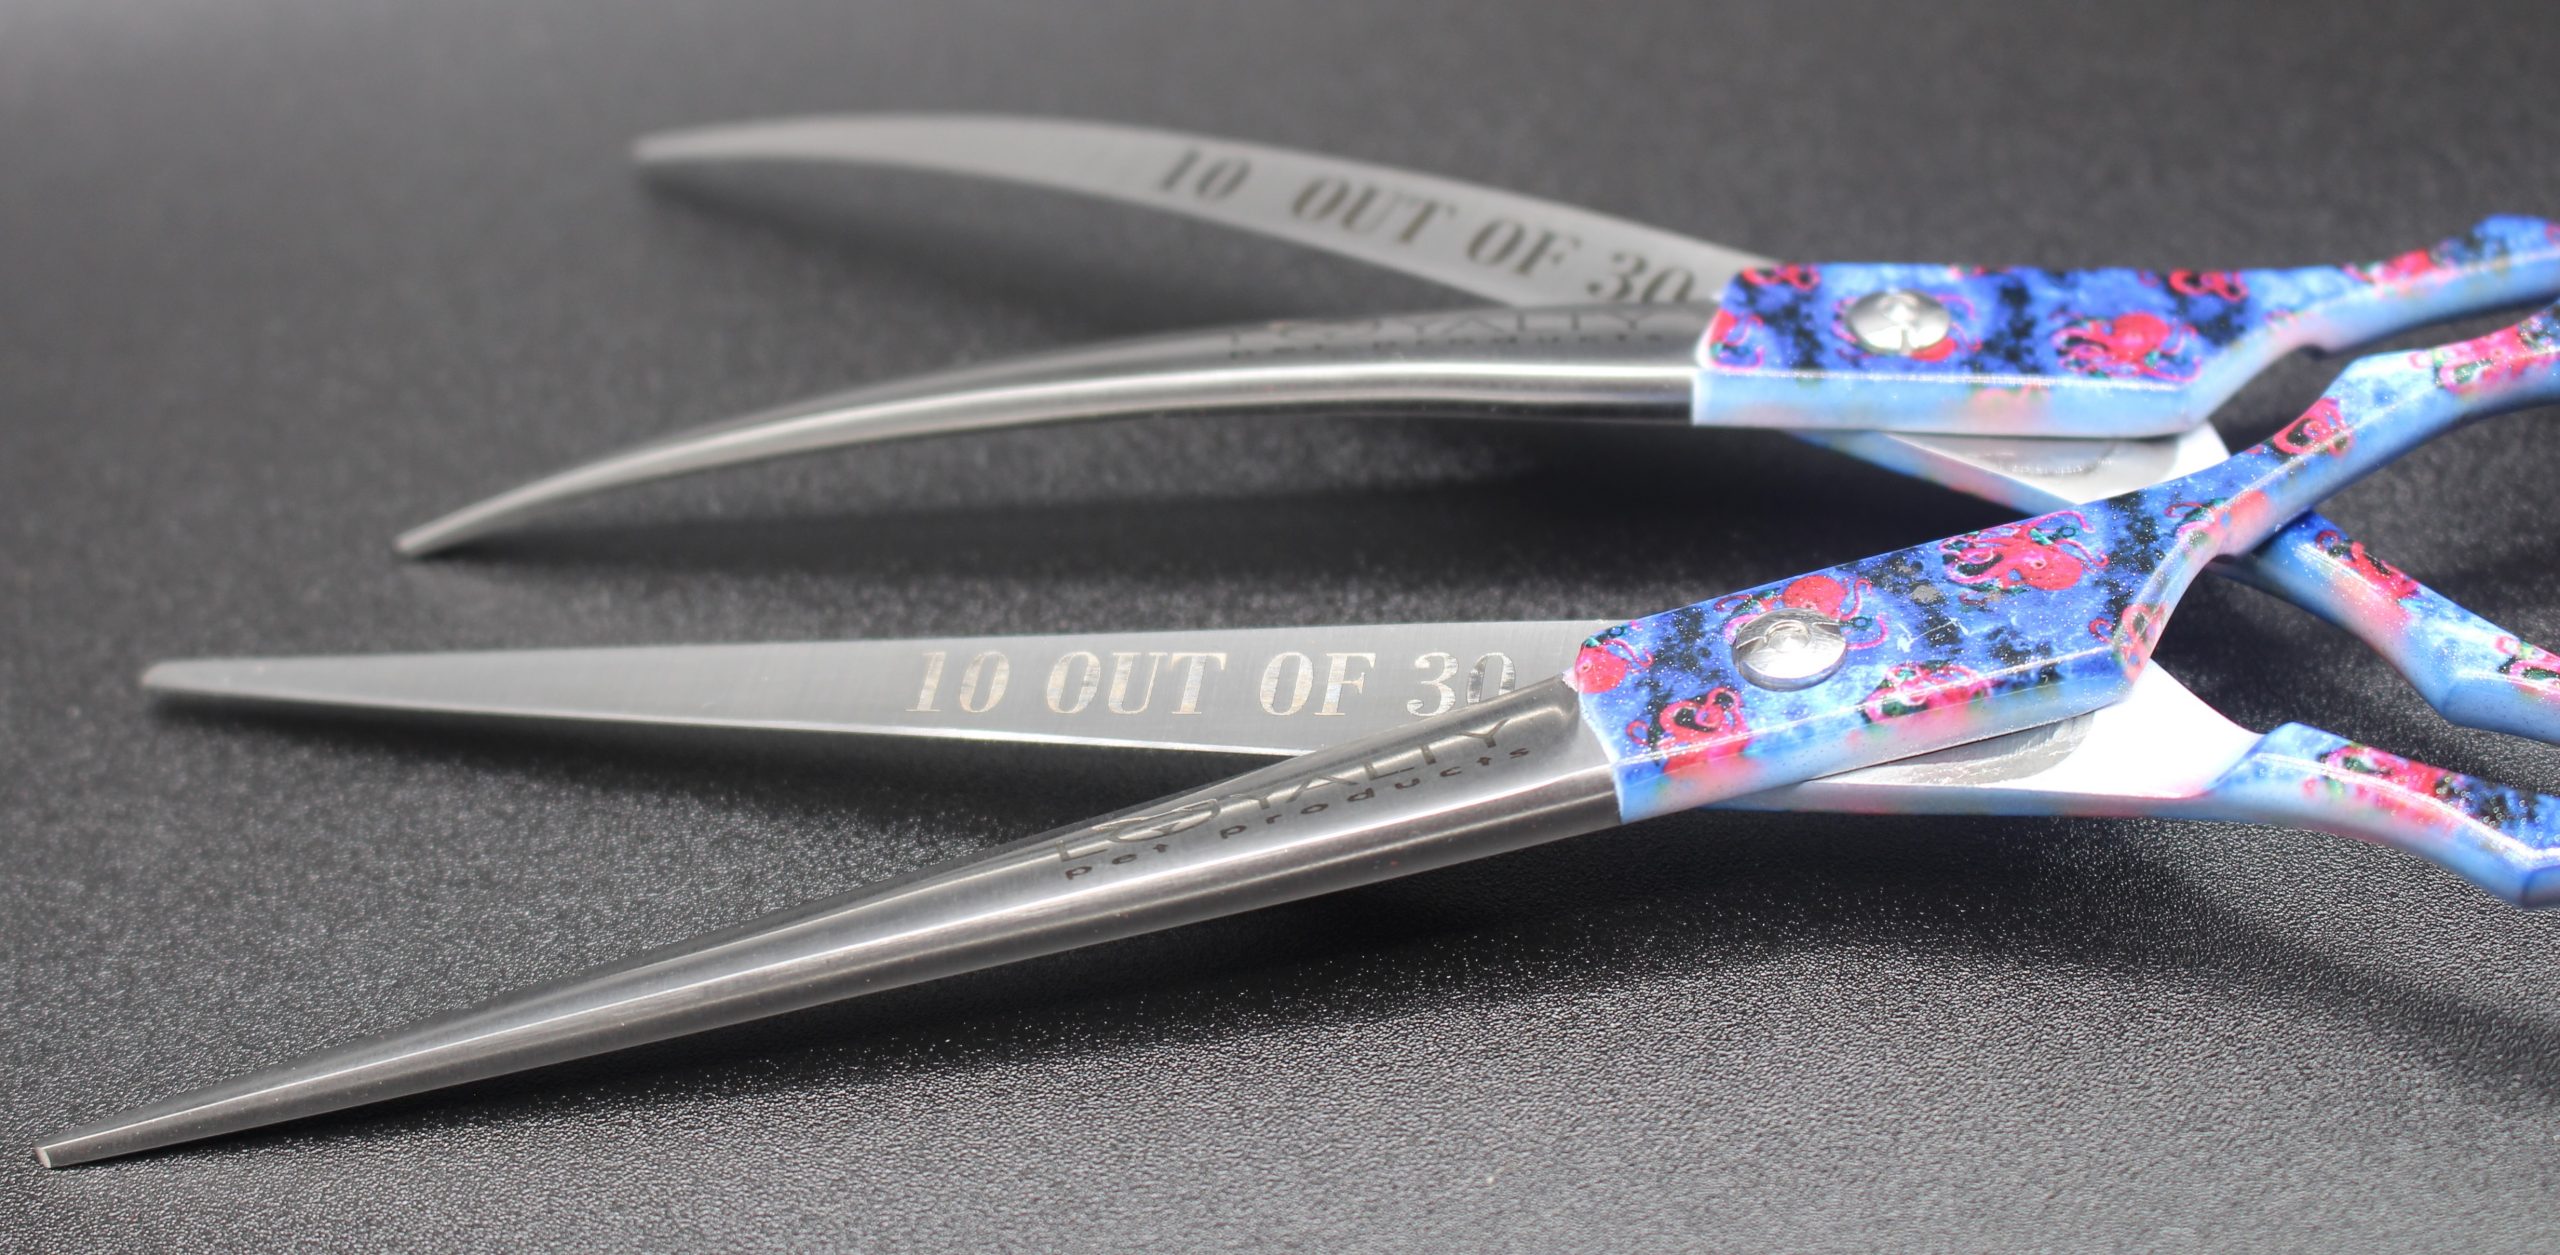 Curved Trimming Scissors - Set of 2